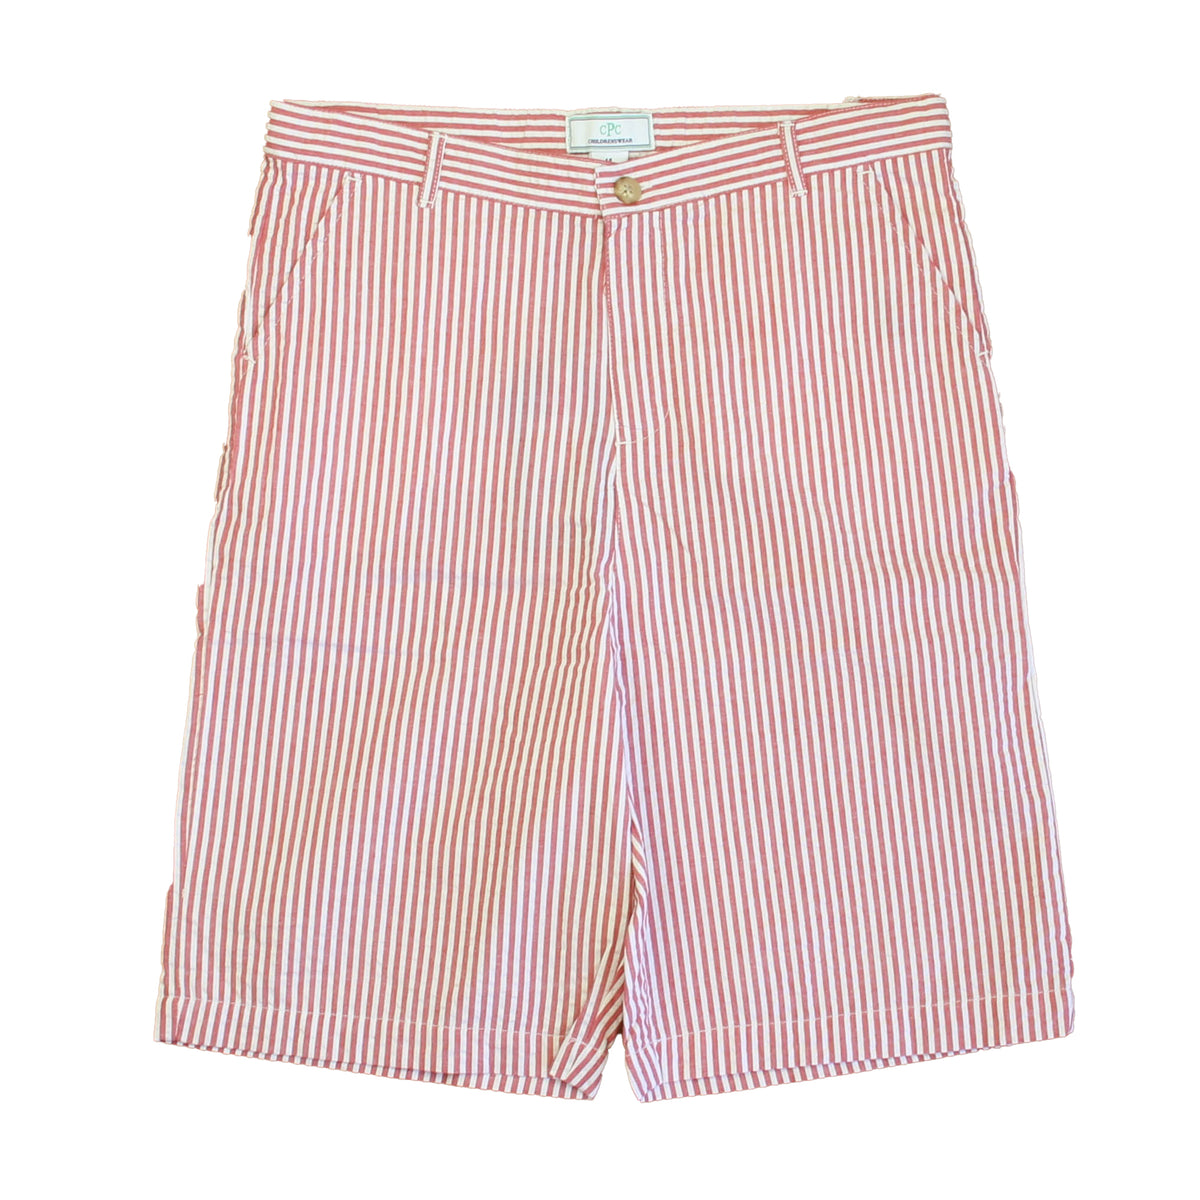 New with Tags: Red | White Stripe Shorts -- FINAL SALE